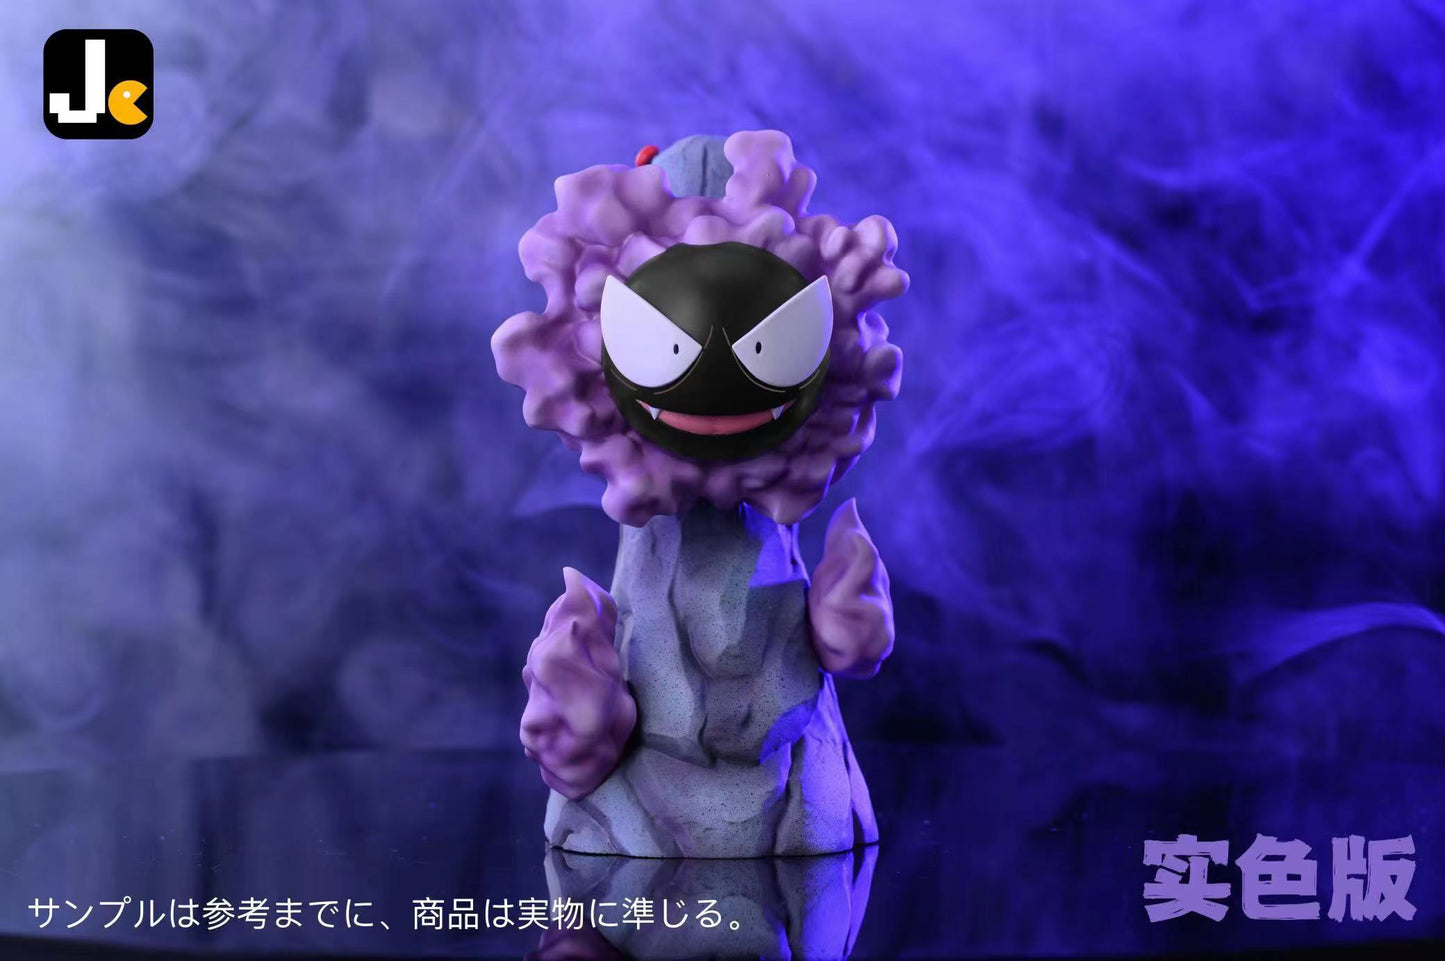 〖Sold Out〗Pokémon Peripheral Products Gastly #092   - JC Studio